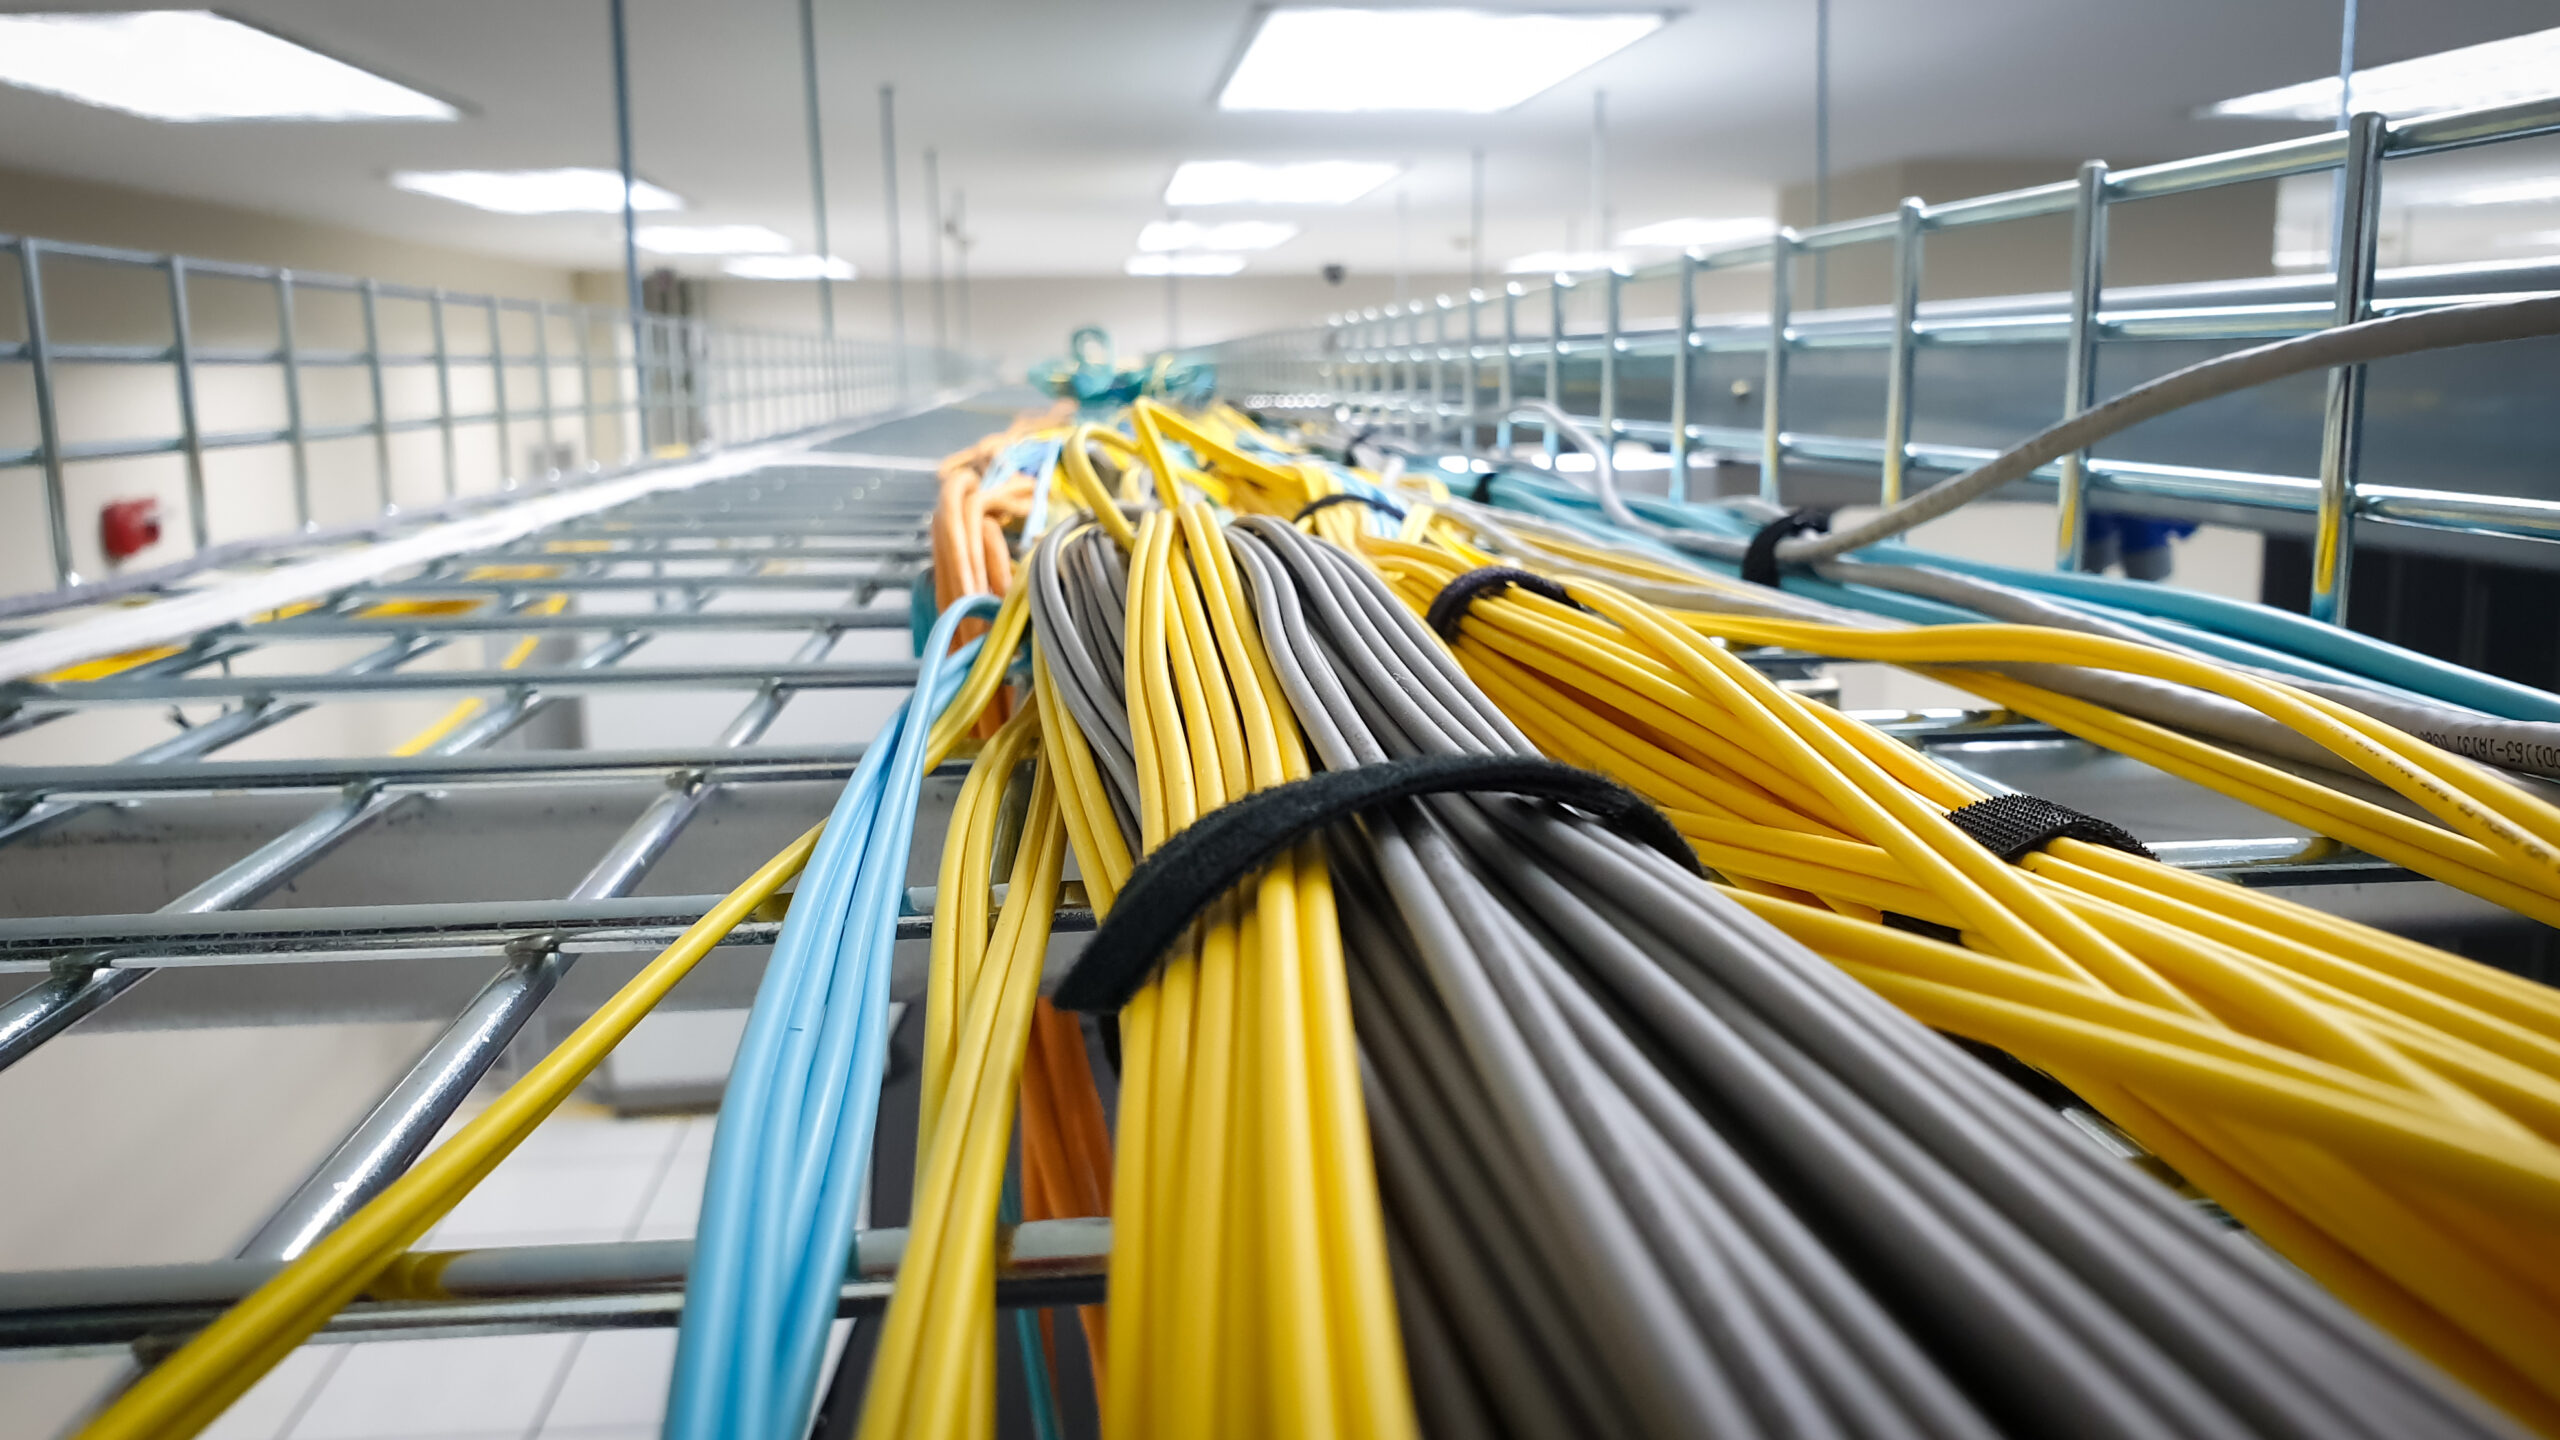 Why You Should Switch to Military-Grade Fiber Optic Cable